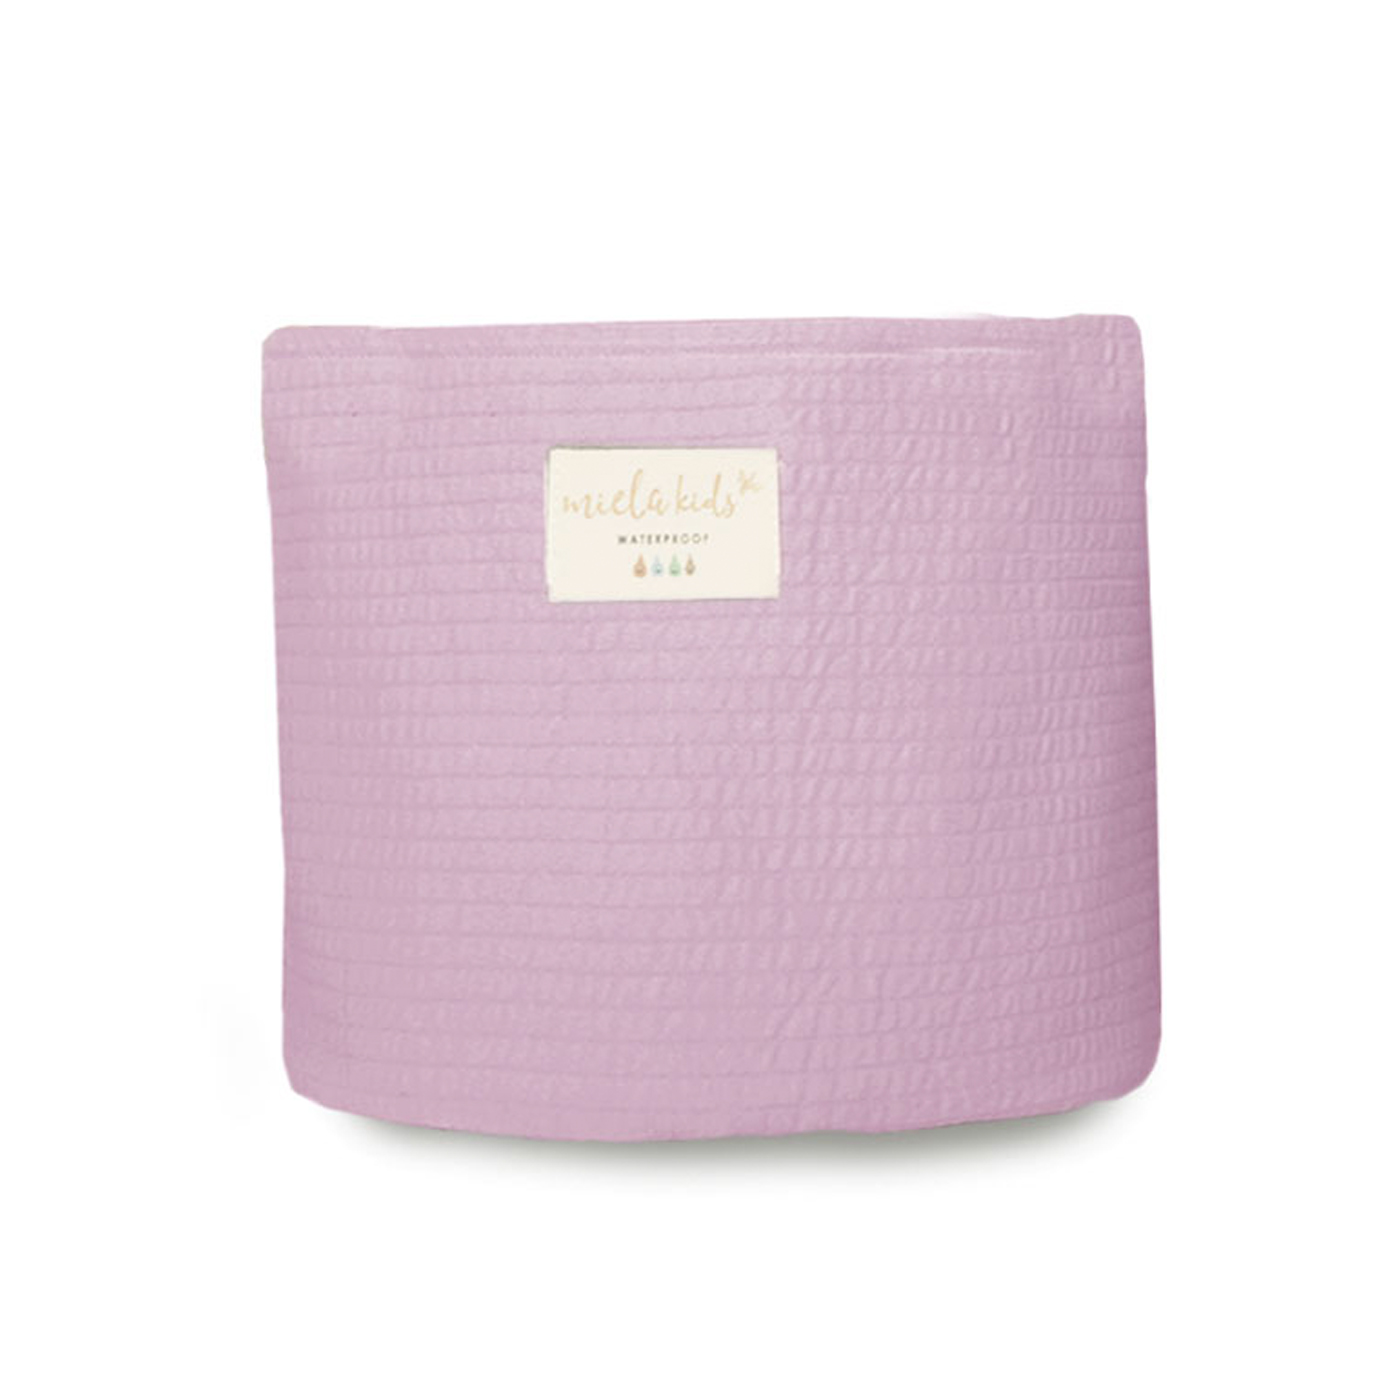  Miela Kids Quilted Organizer Basket S  | Lilac Pink